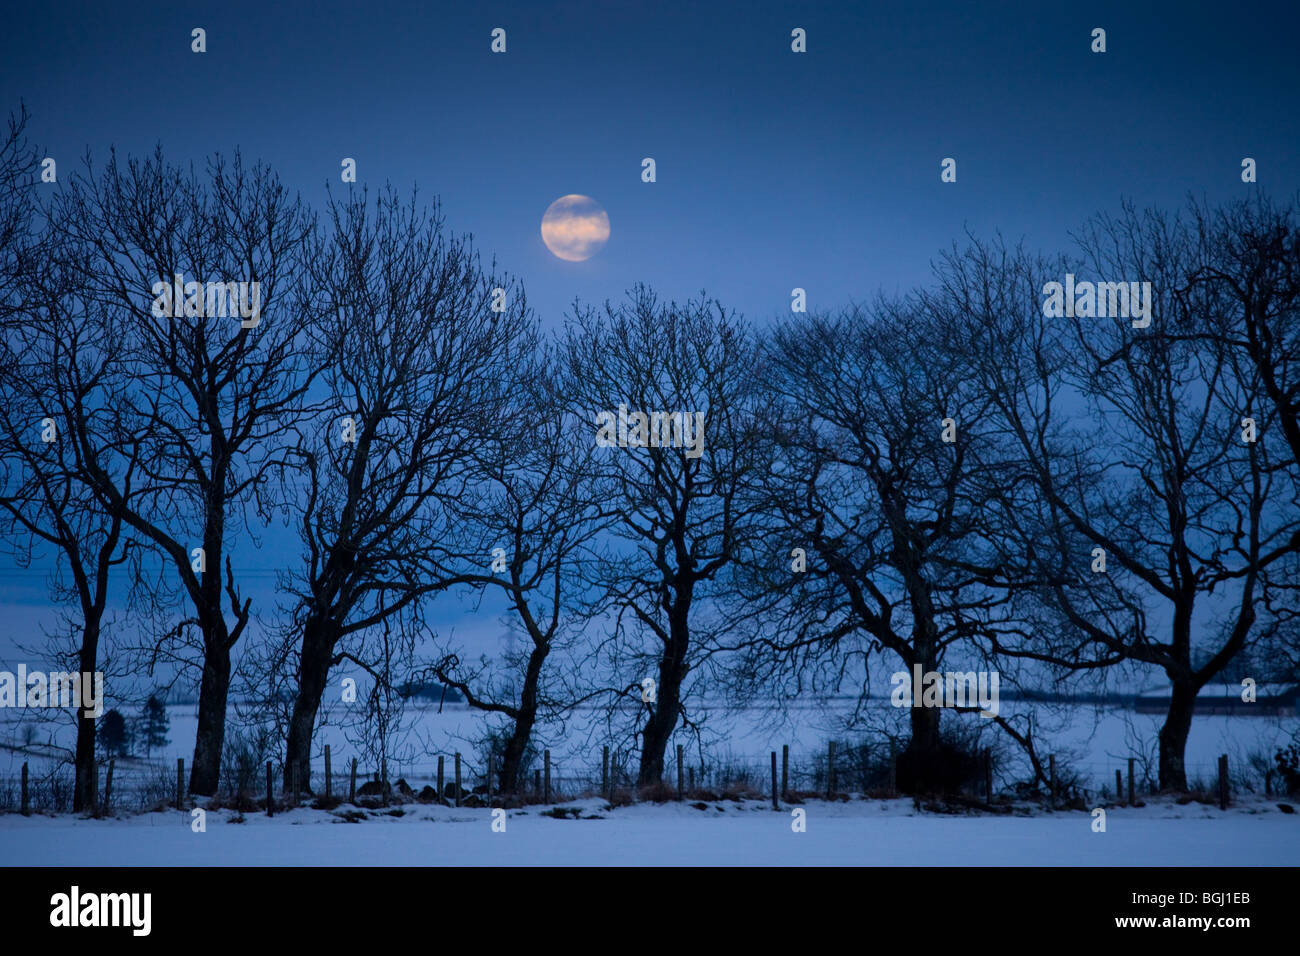 Blue Moon over winter trees in snow. Stock Photo